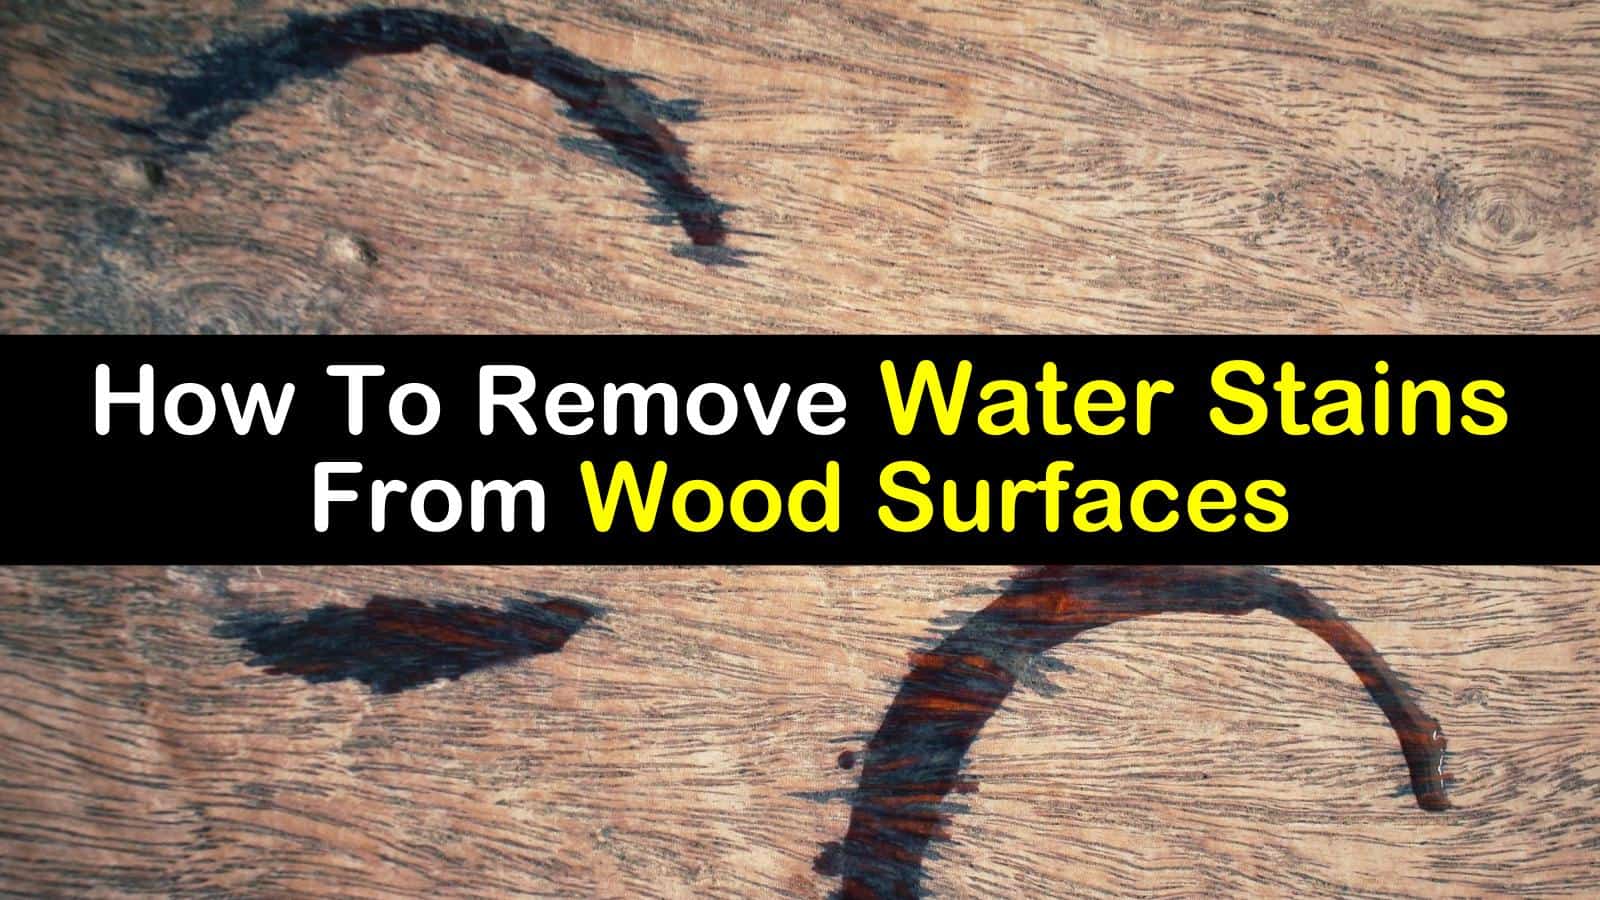 how to remove water stains from wood titilimg1